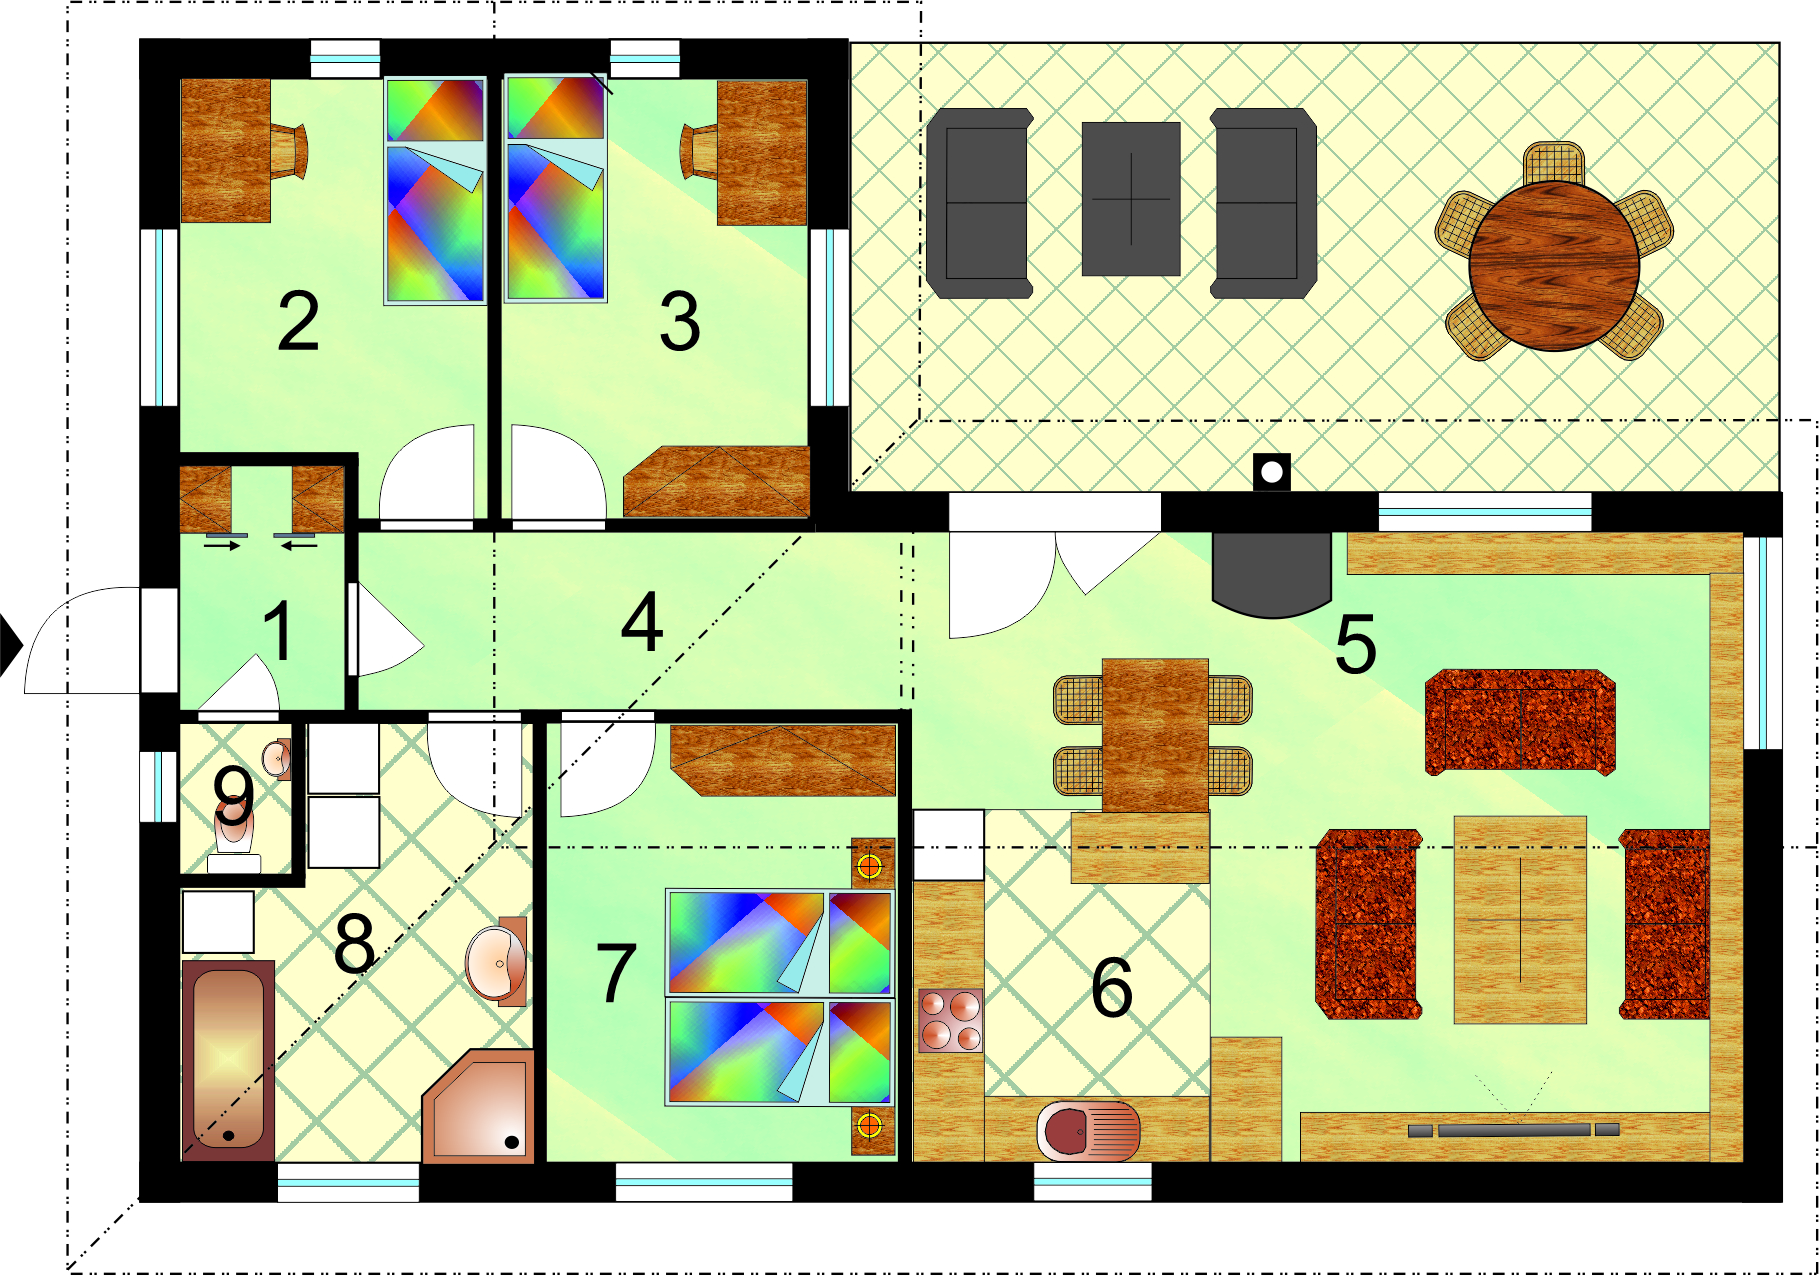 L-shaped family house with three bedrooms, nr. 23, layout